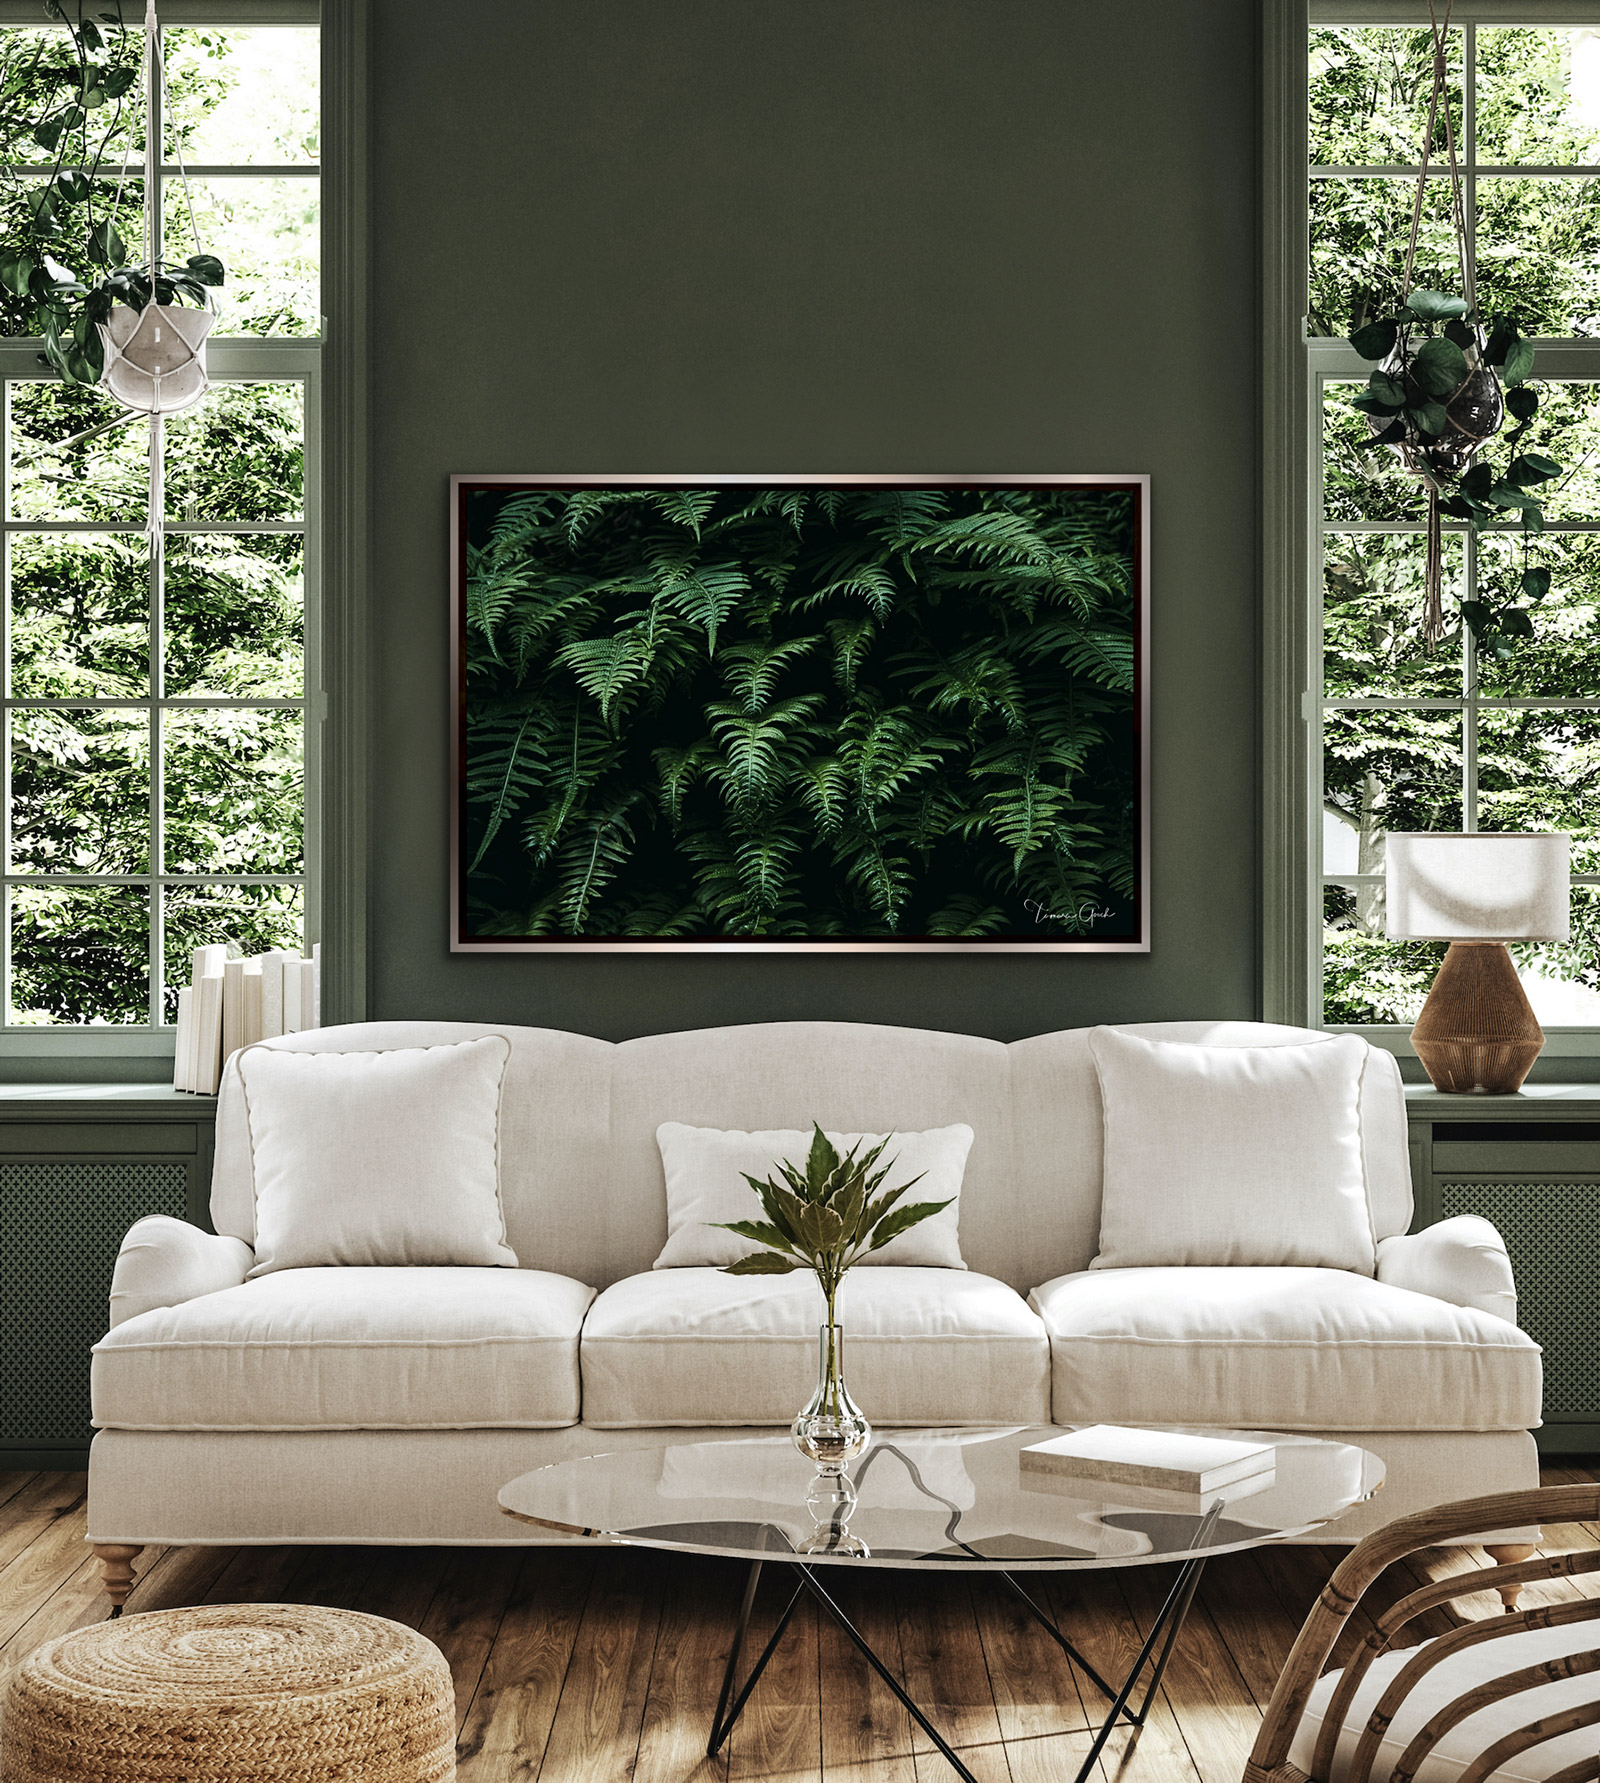 Fine Art Photo Print of a Fern Garden framed hanging over a couch.